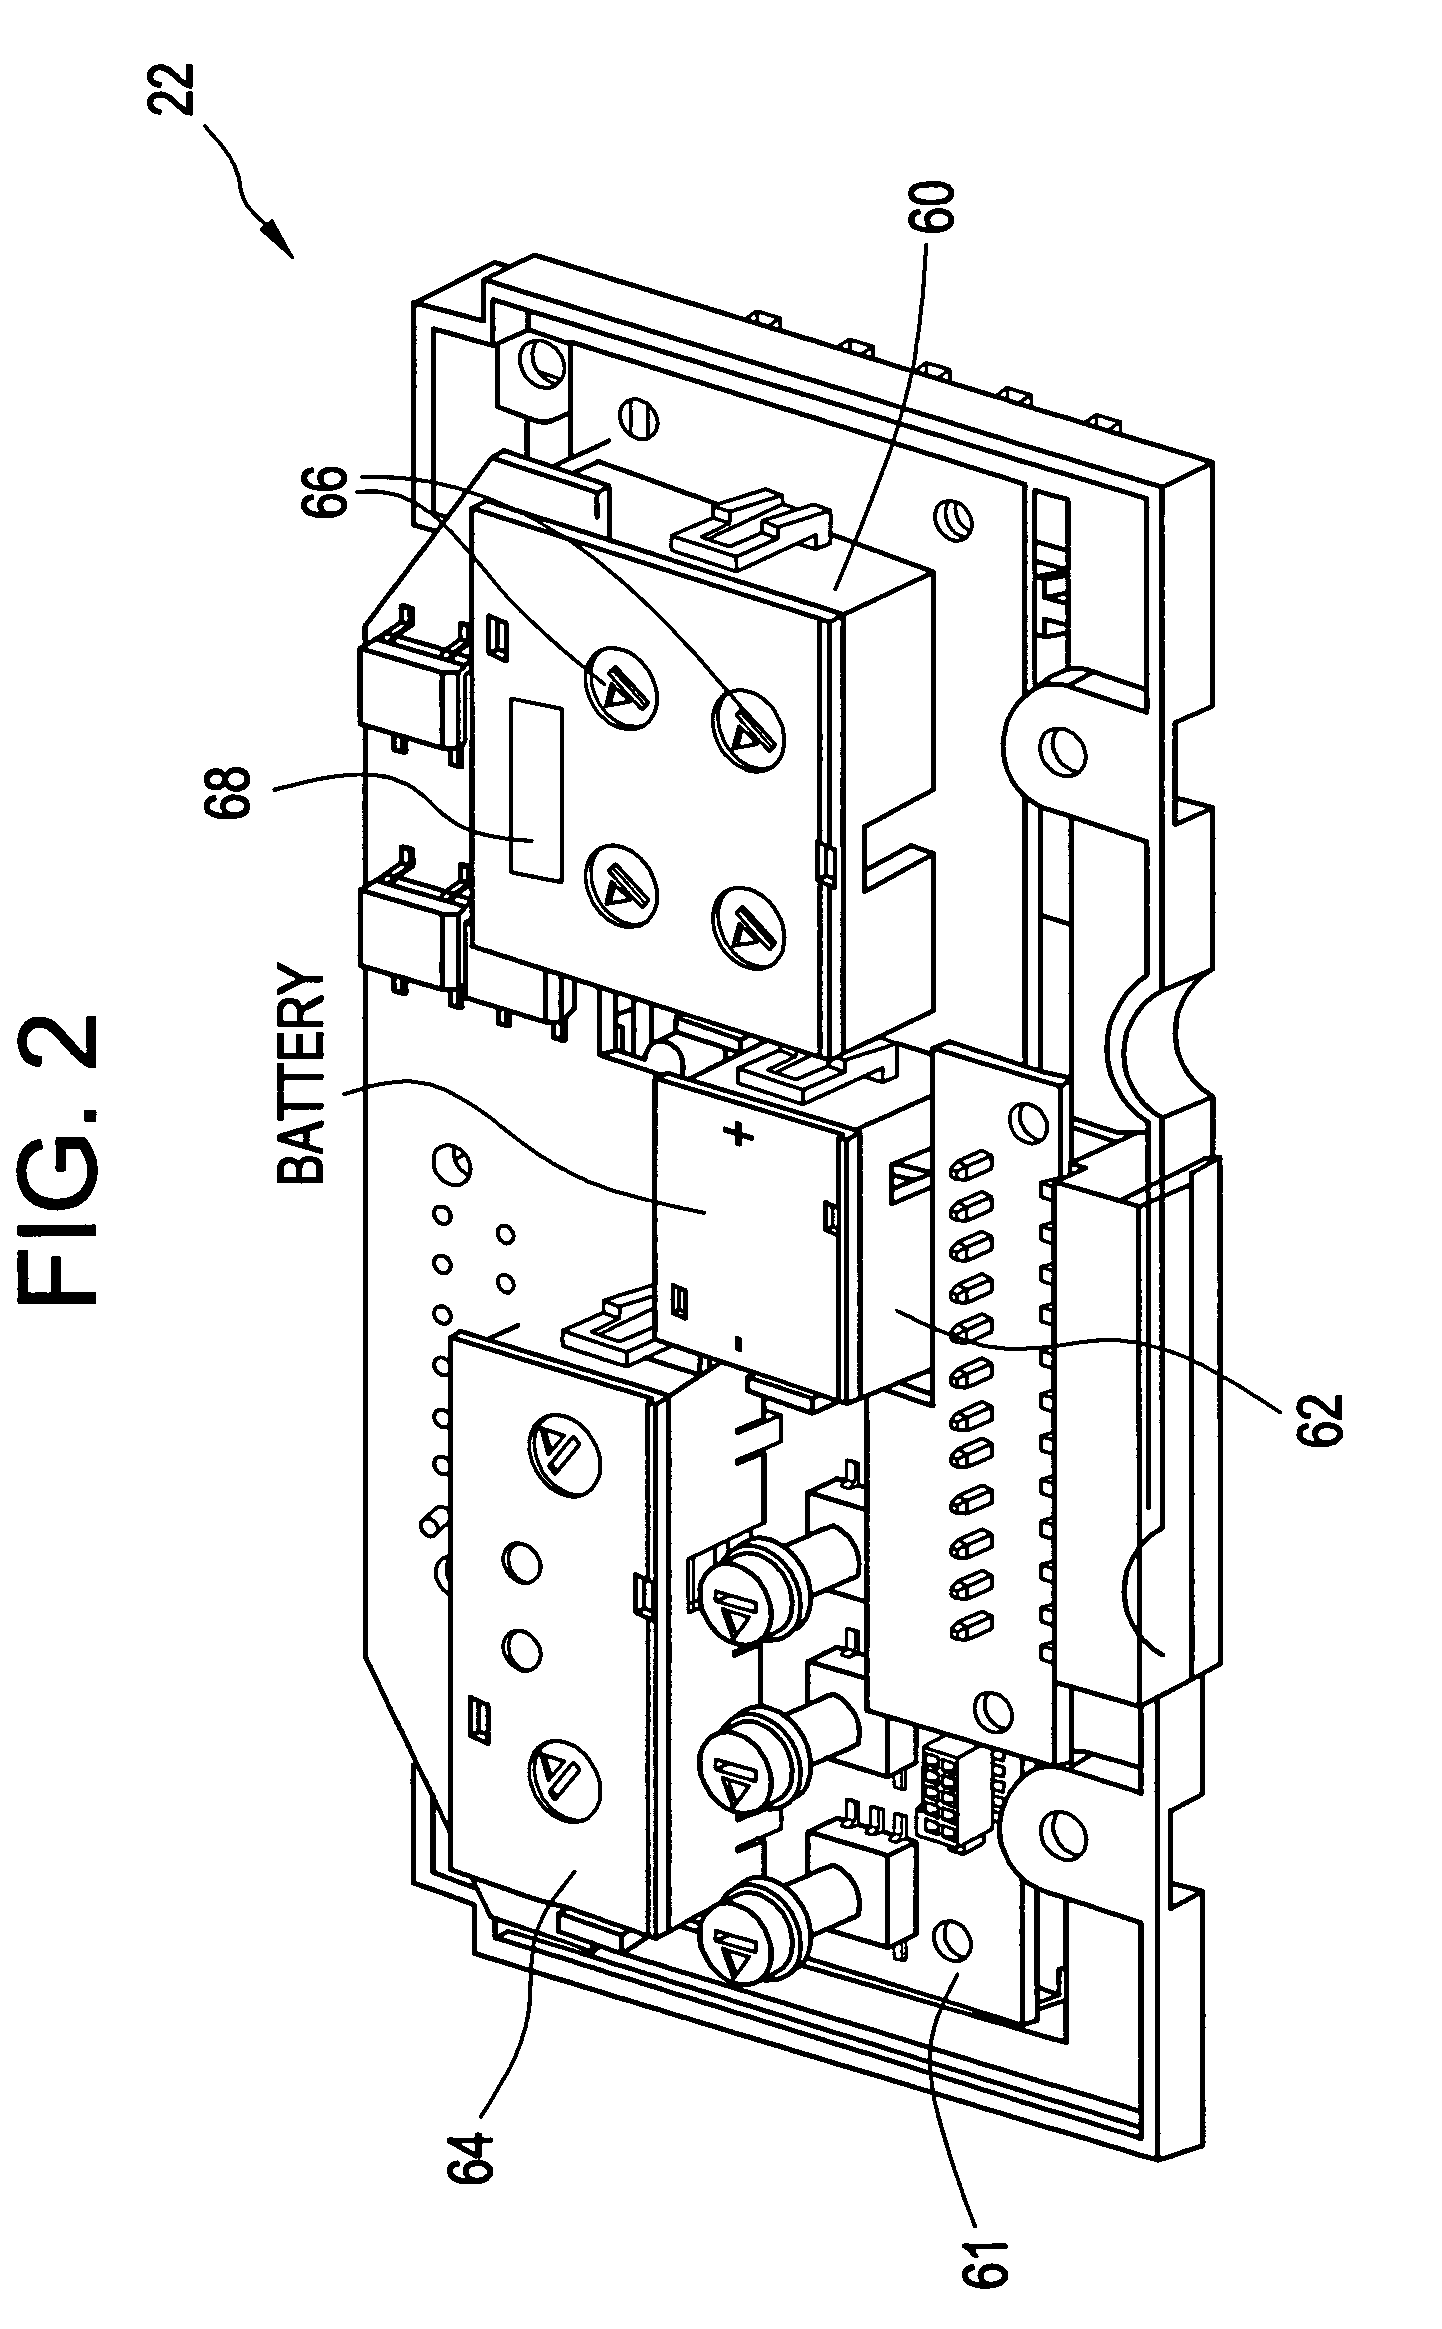 Method and apparatus for accessing and activating accessory functions of electronic circuit breakers